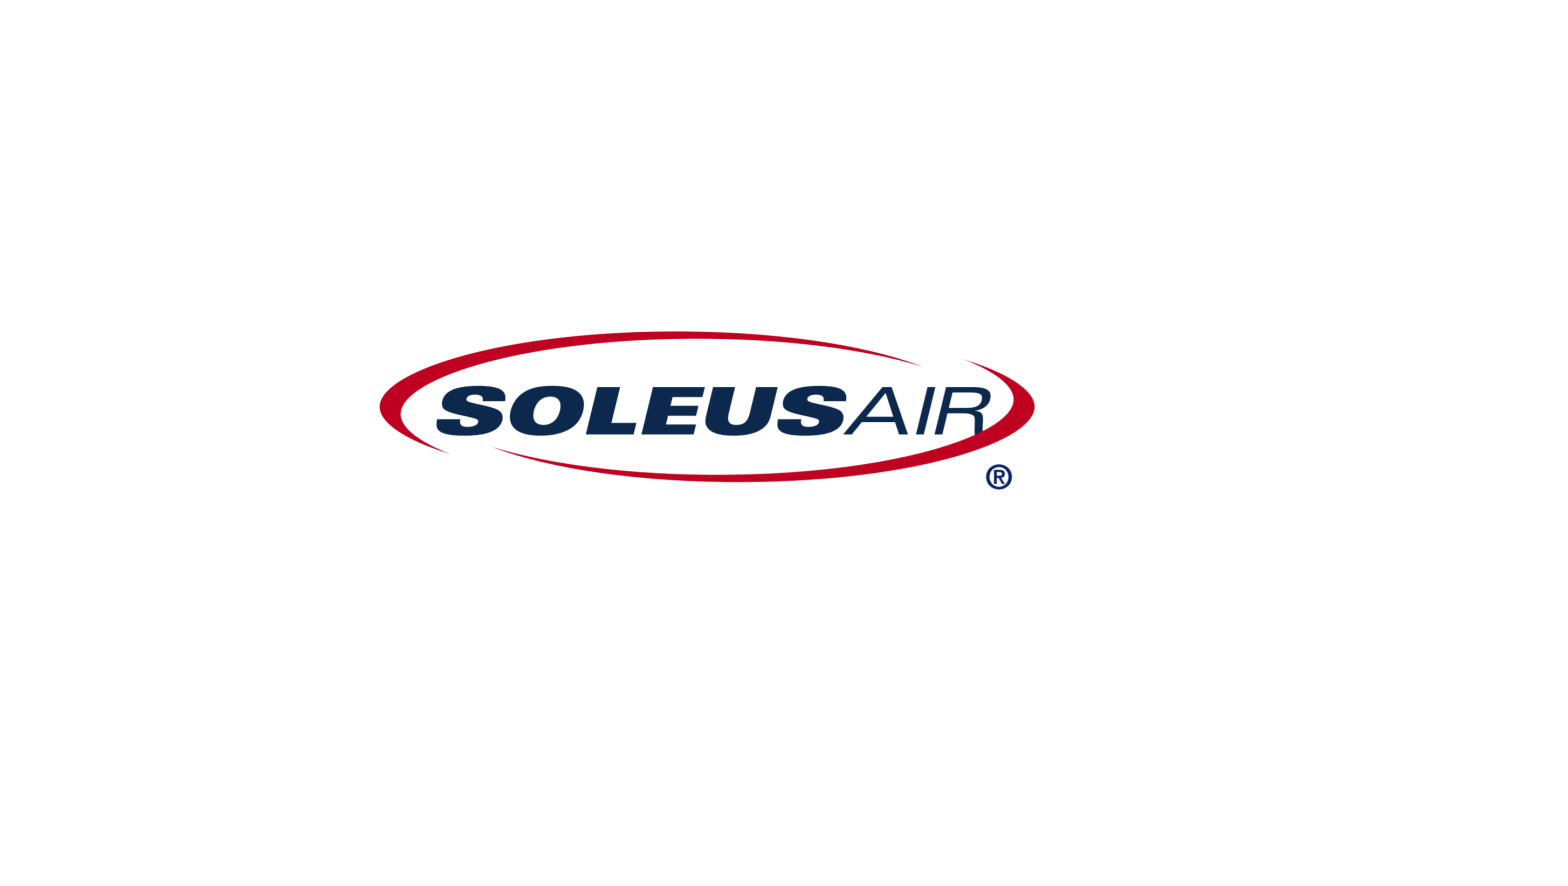 SOLEUSAIR V40226 Energy Star Window Air Conditioner with Remote and WiFi Control User Guide